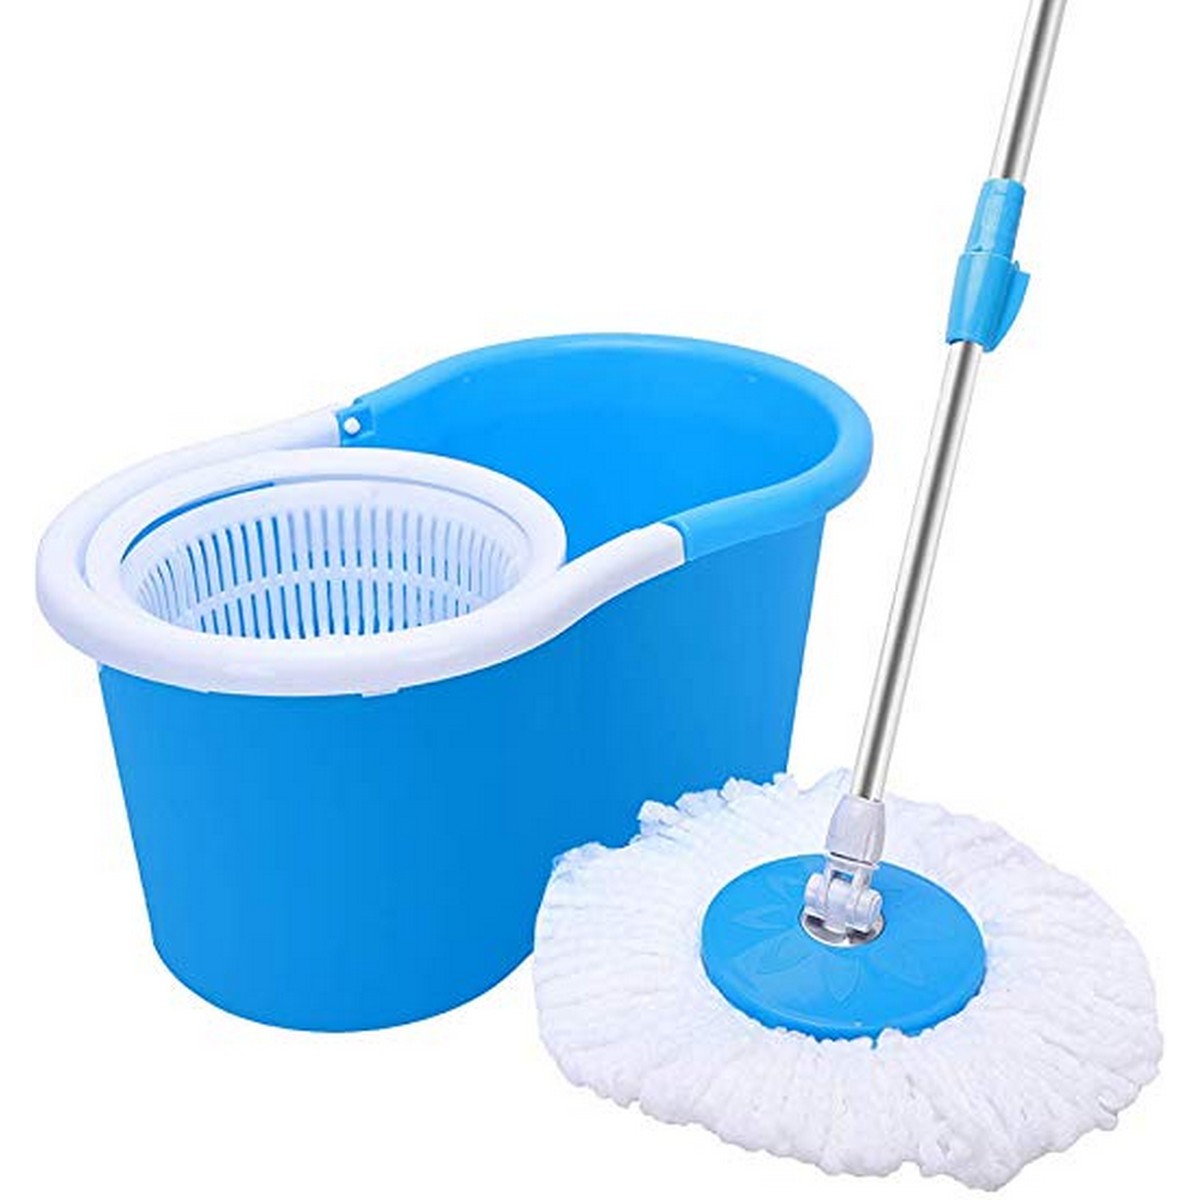 Flexy Easy Wring Magic Cleaning 360 spin stainless basket Mop Set - Blue